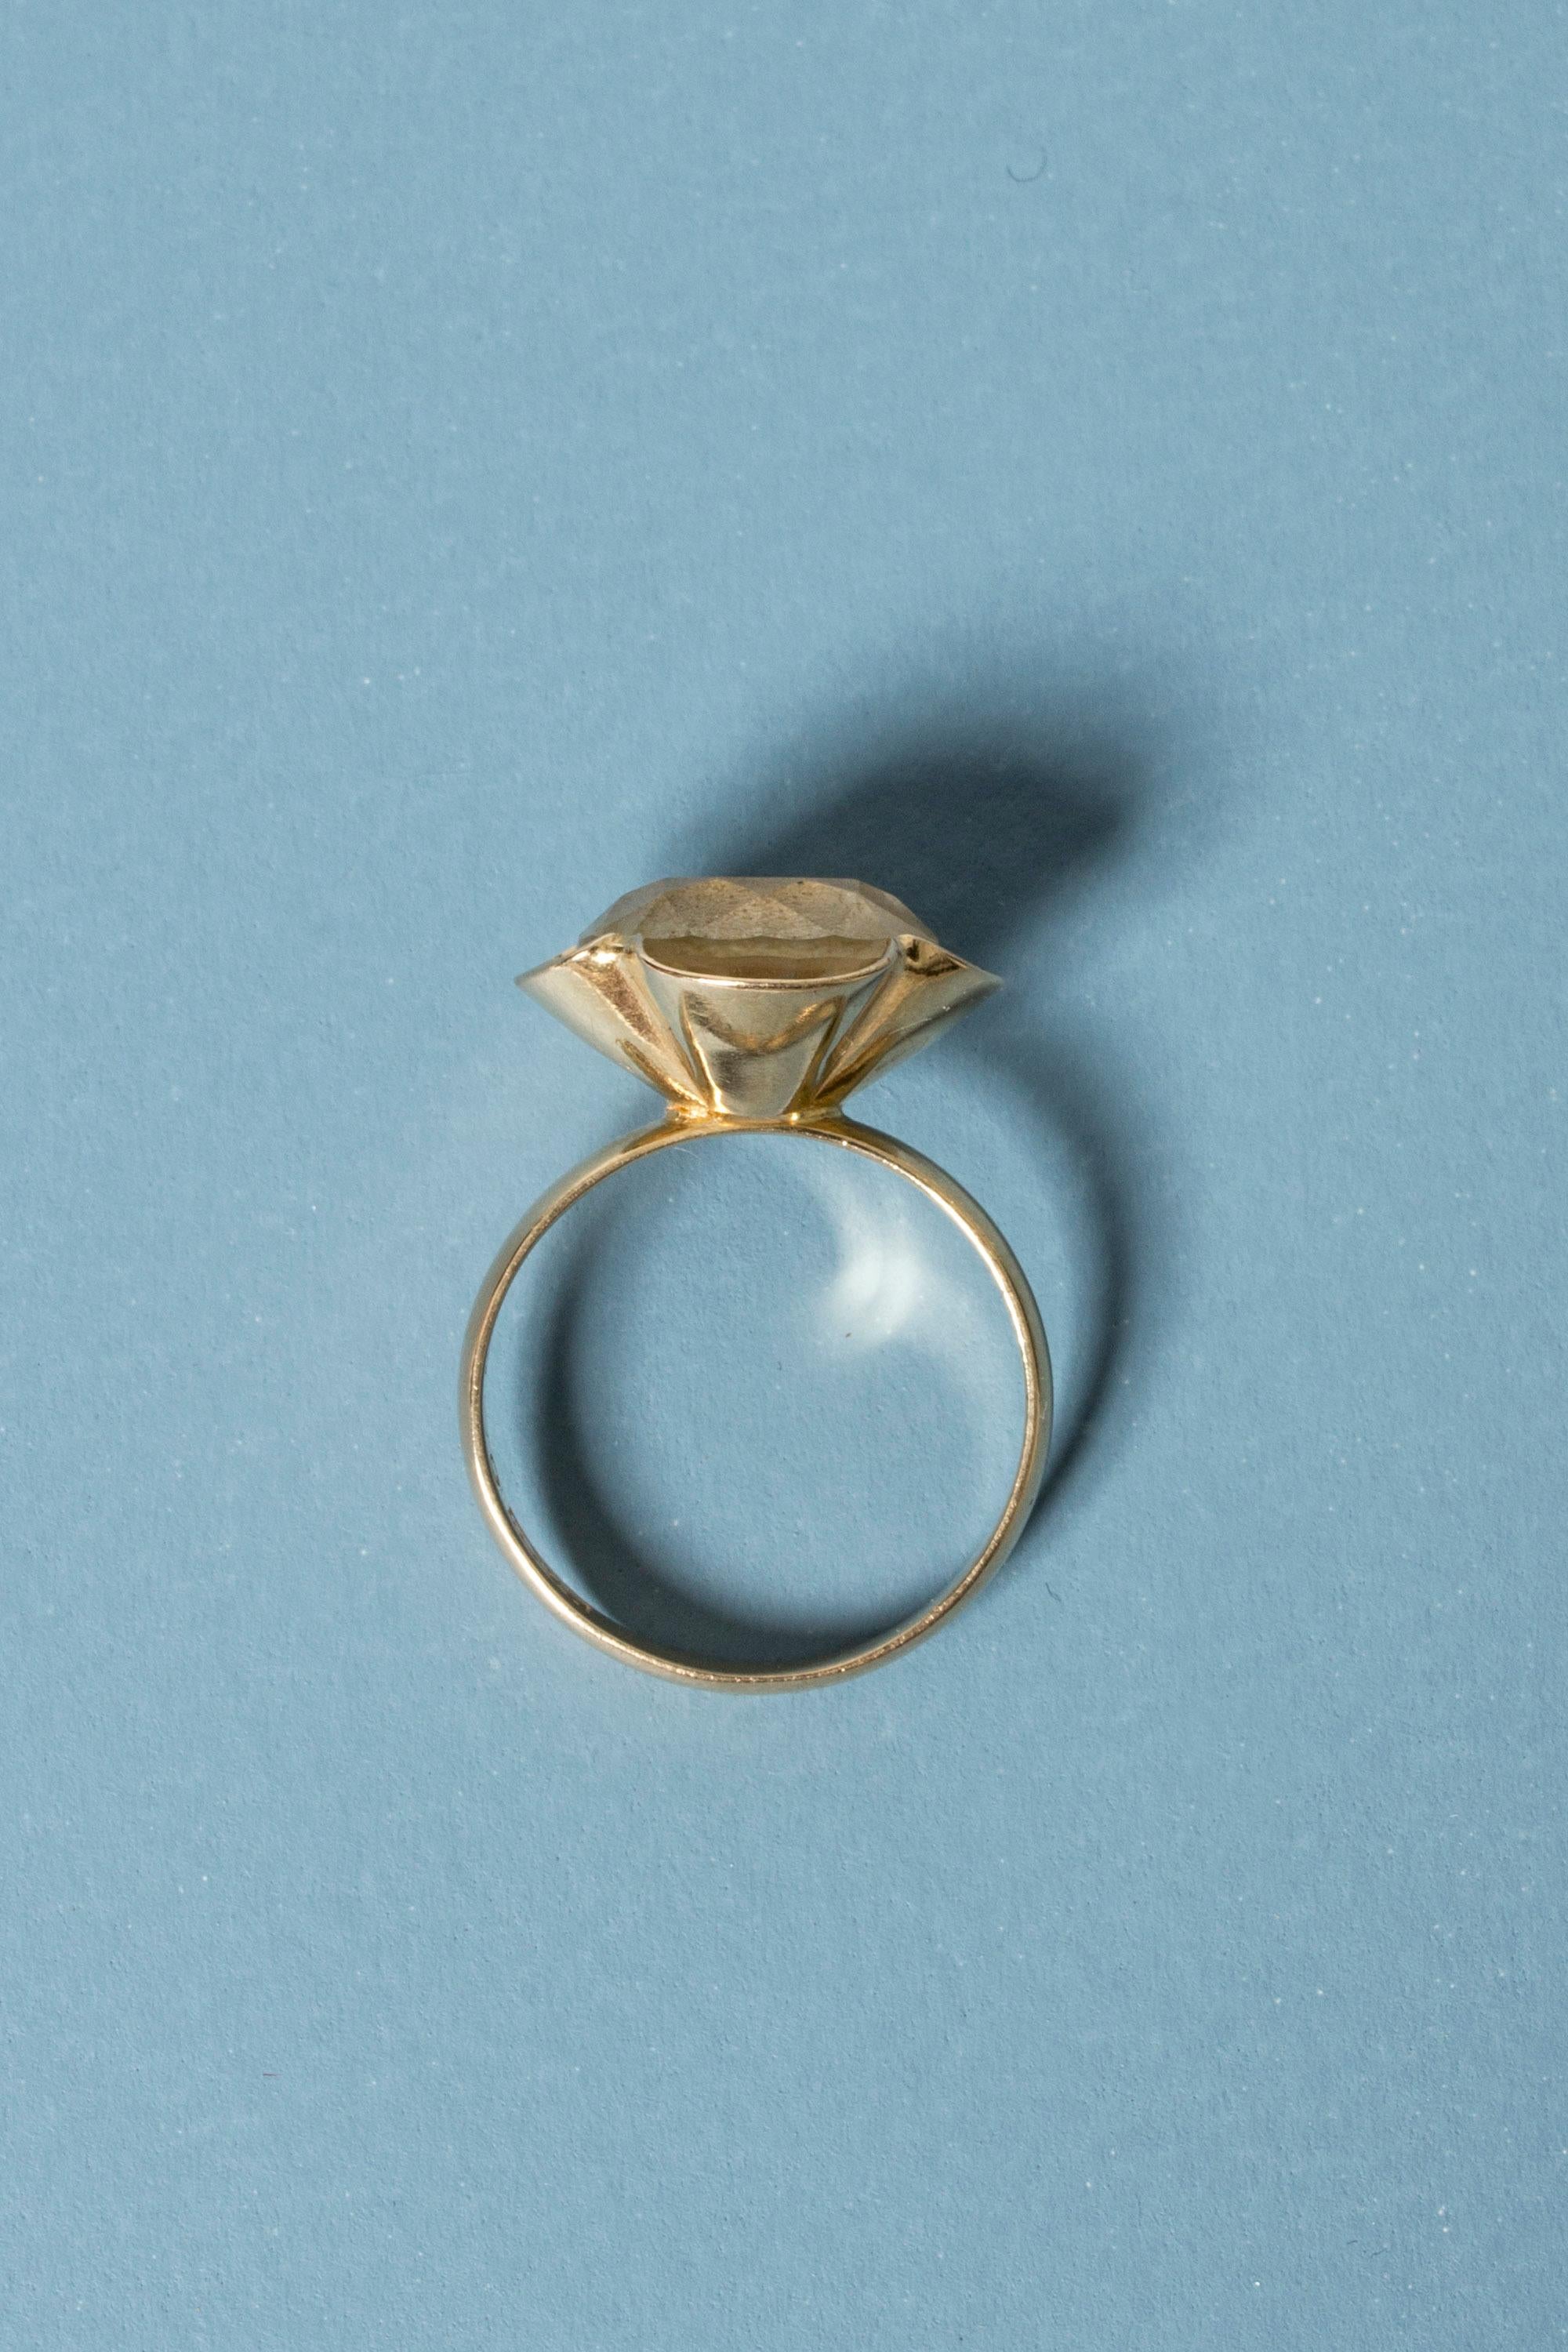 Women's or Men's Modernist Gold and Rock Crystal Ring from Alton, Sweden, 1976